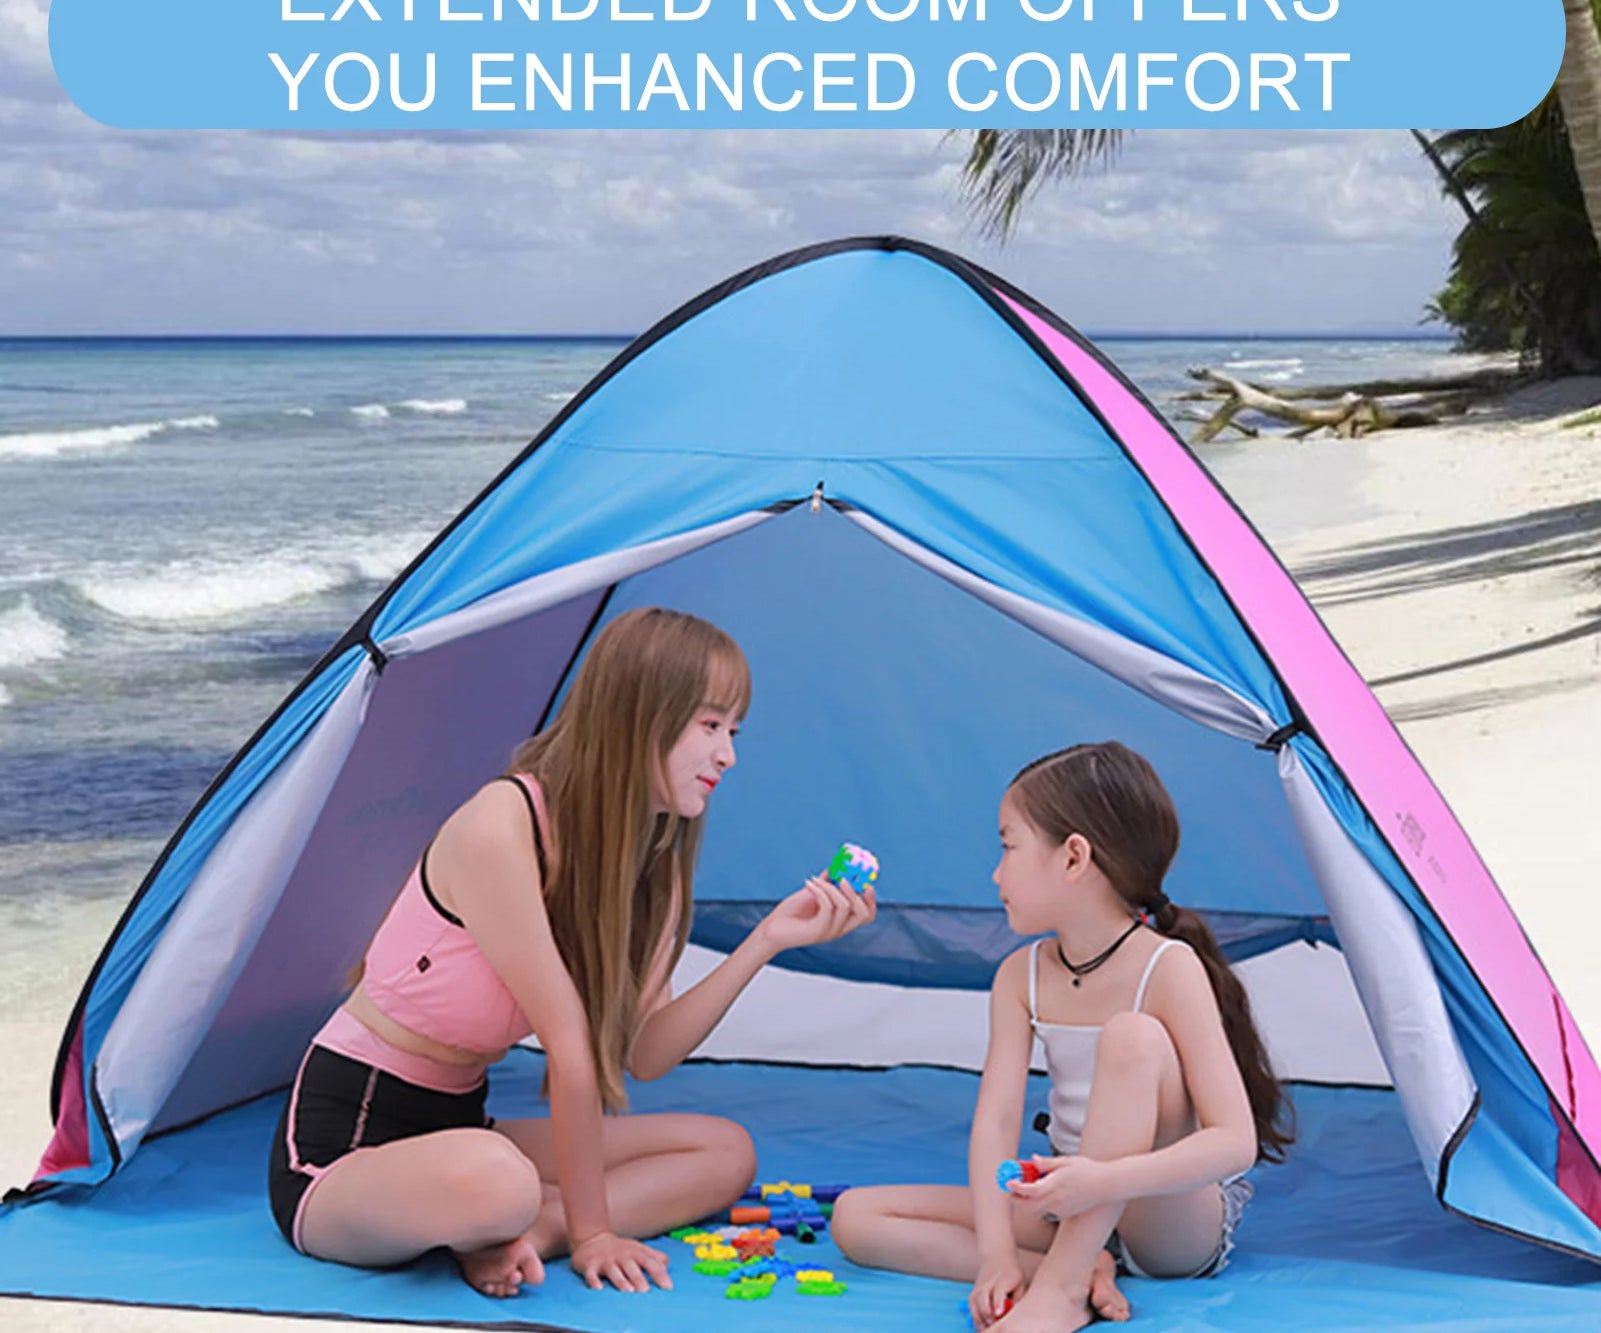 Adult and child in beach tent